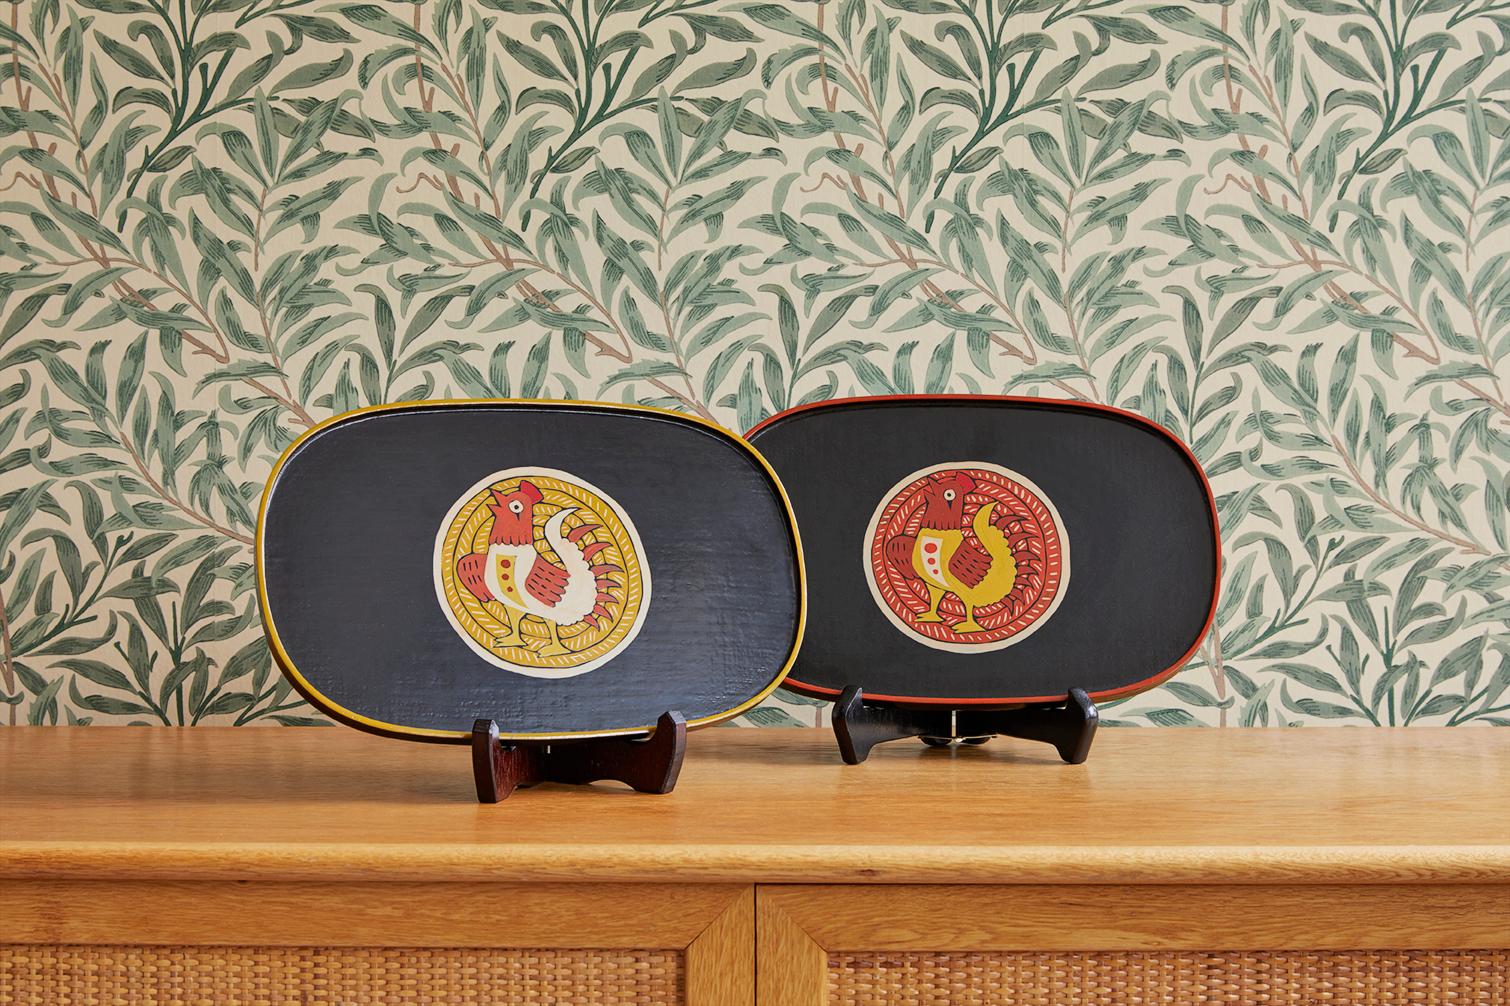 Lovely pair of lacquer trays with chicken design.
 
Joji Harada was born in Tokyo in 1949. He exhibited his lacquerware yearly in Okinawa. Okinawa has a long tradition of producing and exporting lacquer.
In addition to making original pieces, he